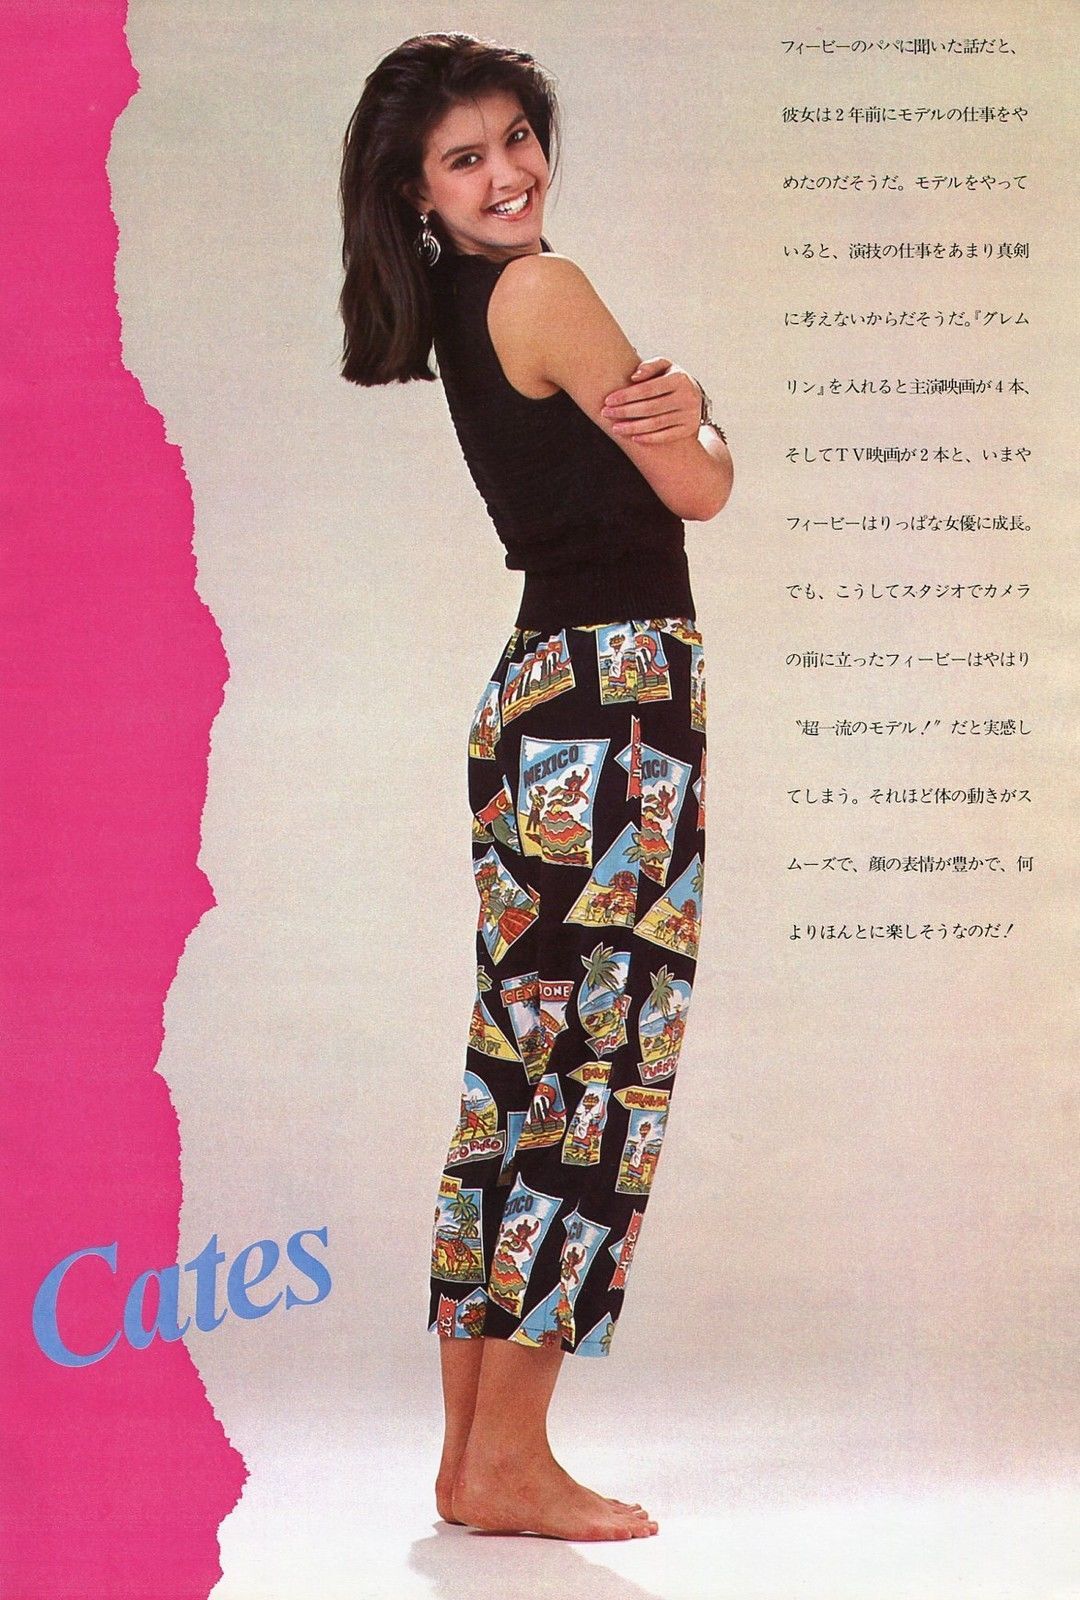 People who liked Phoebe Cates's feet, also liked.